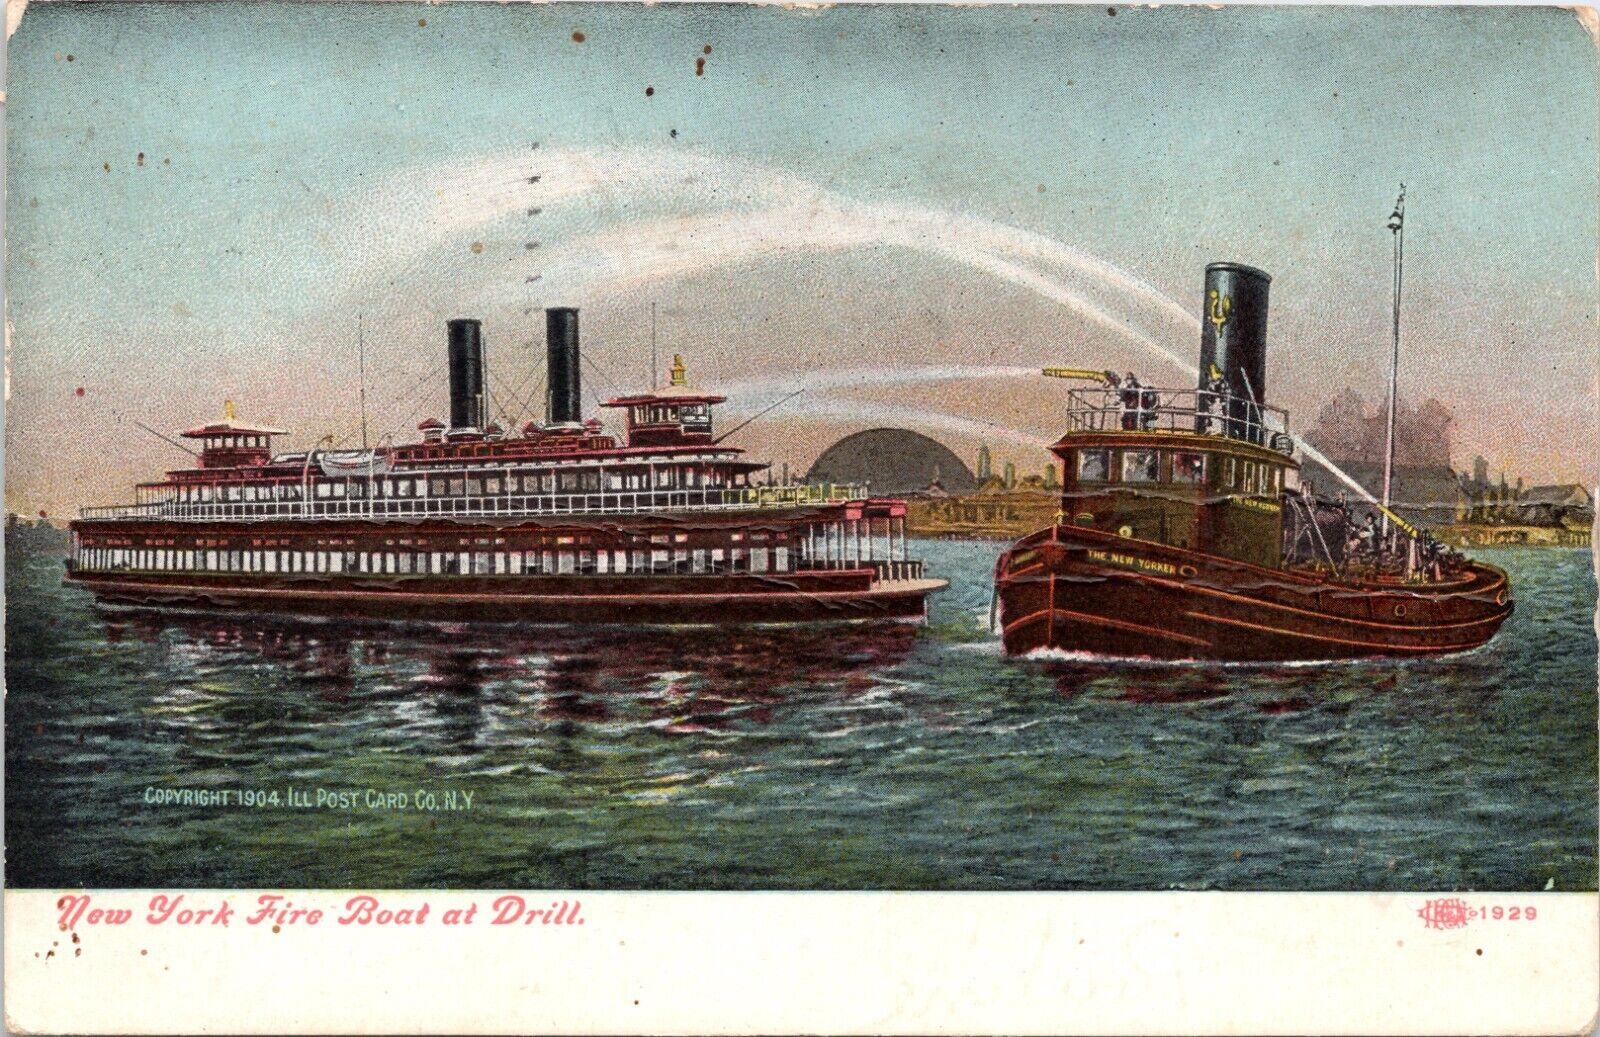 C.1908 New York Fire Department Boat Drill Ships Firefighter Postcard A420